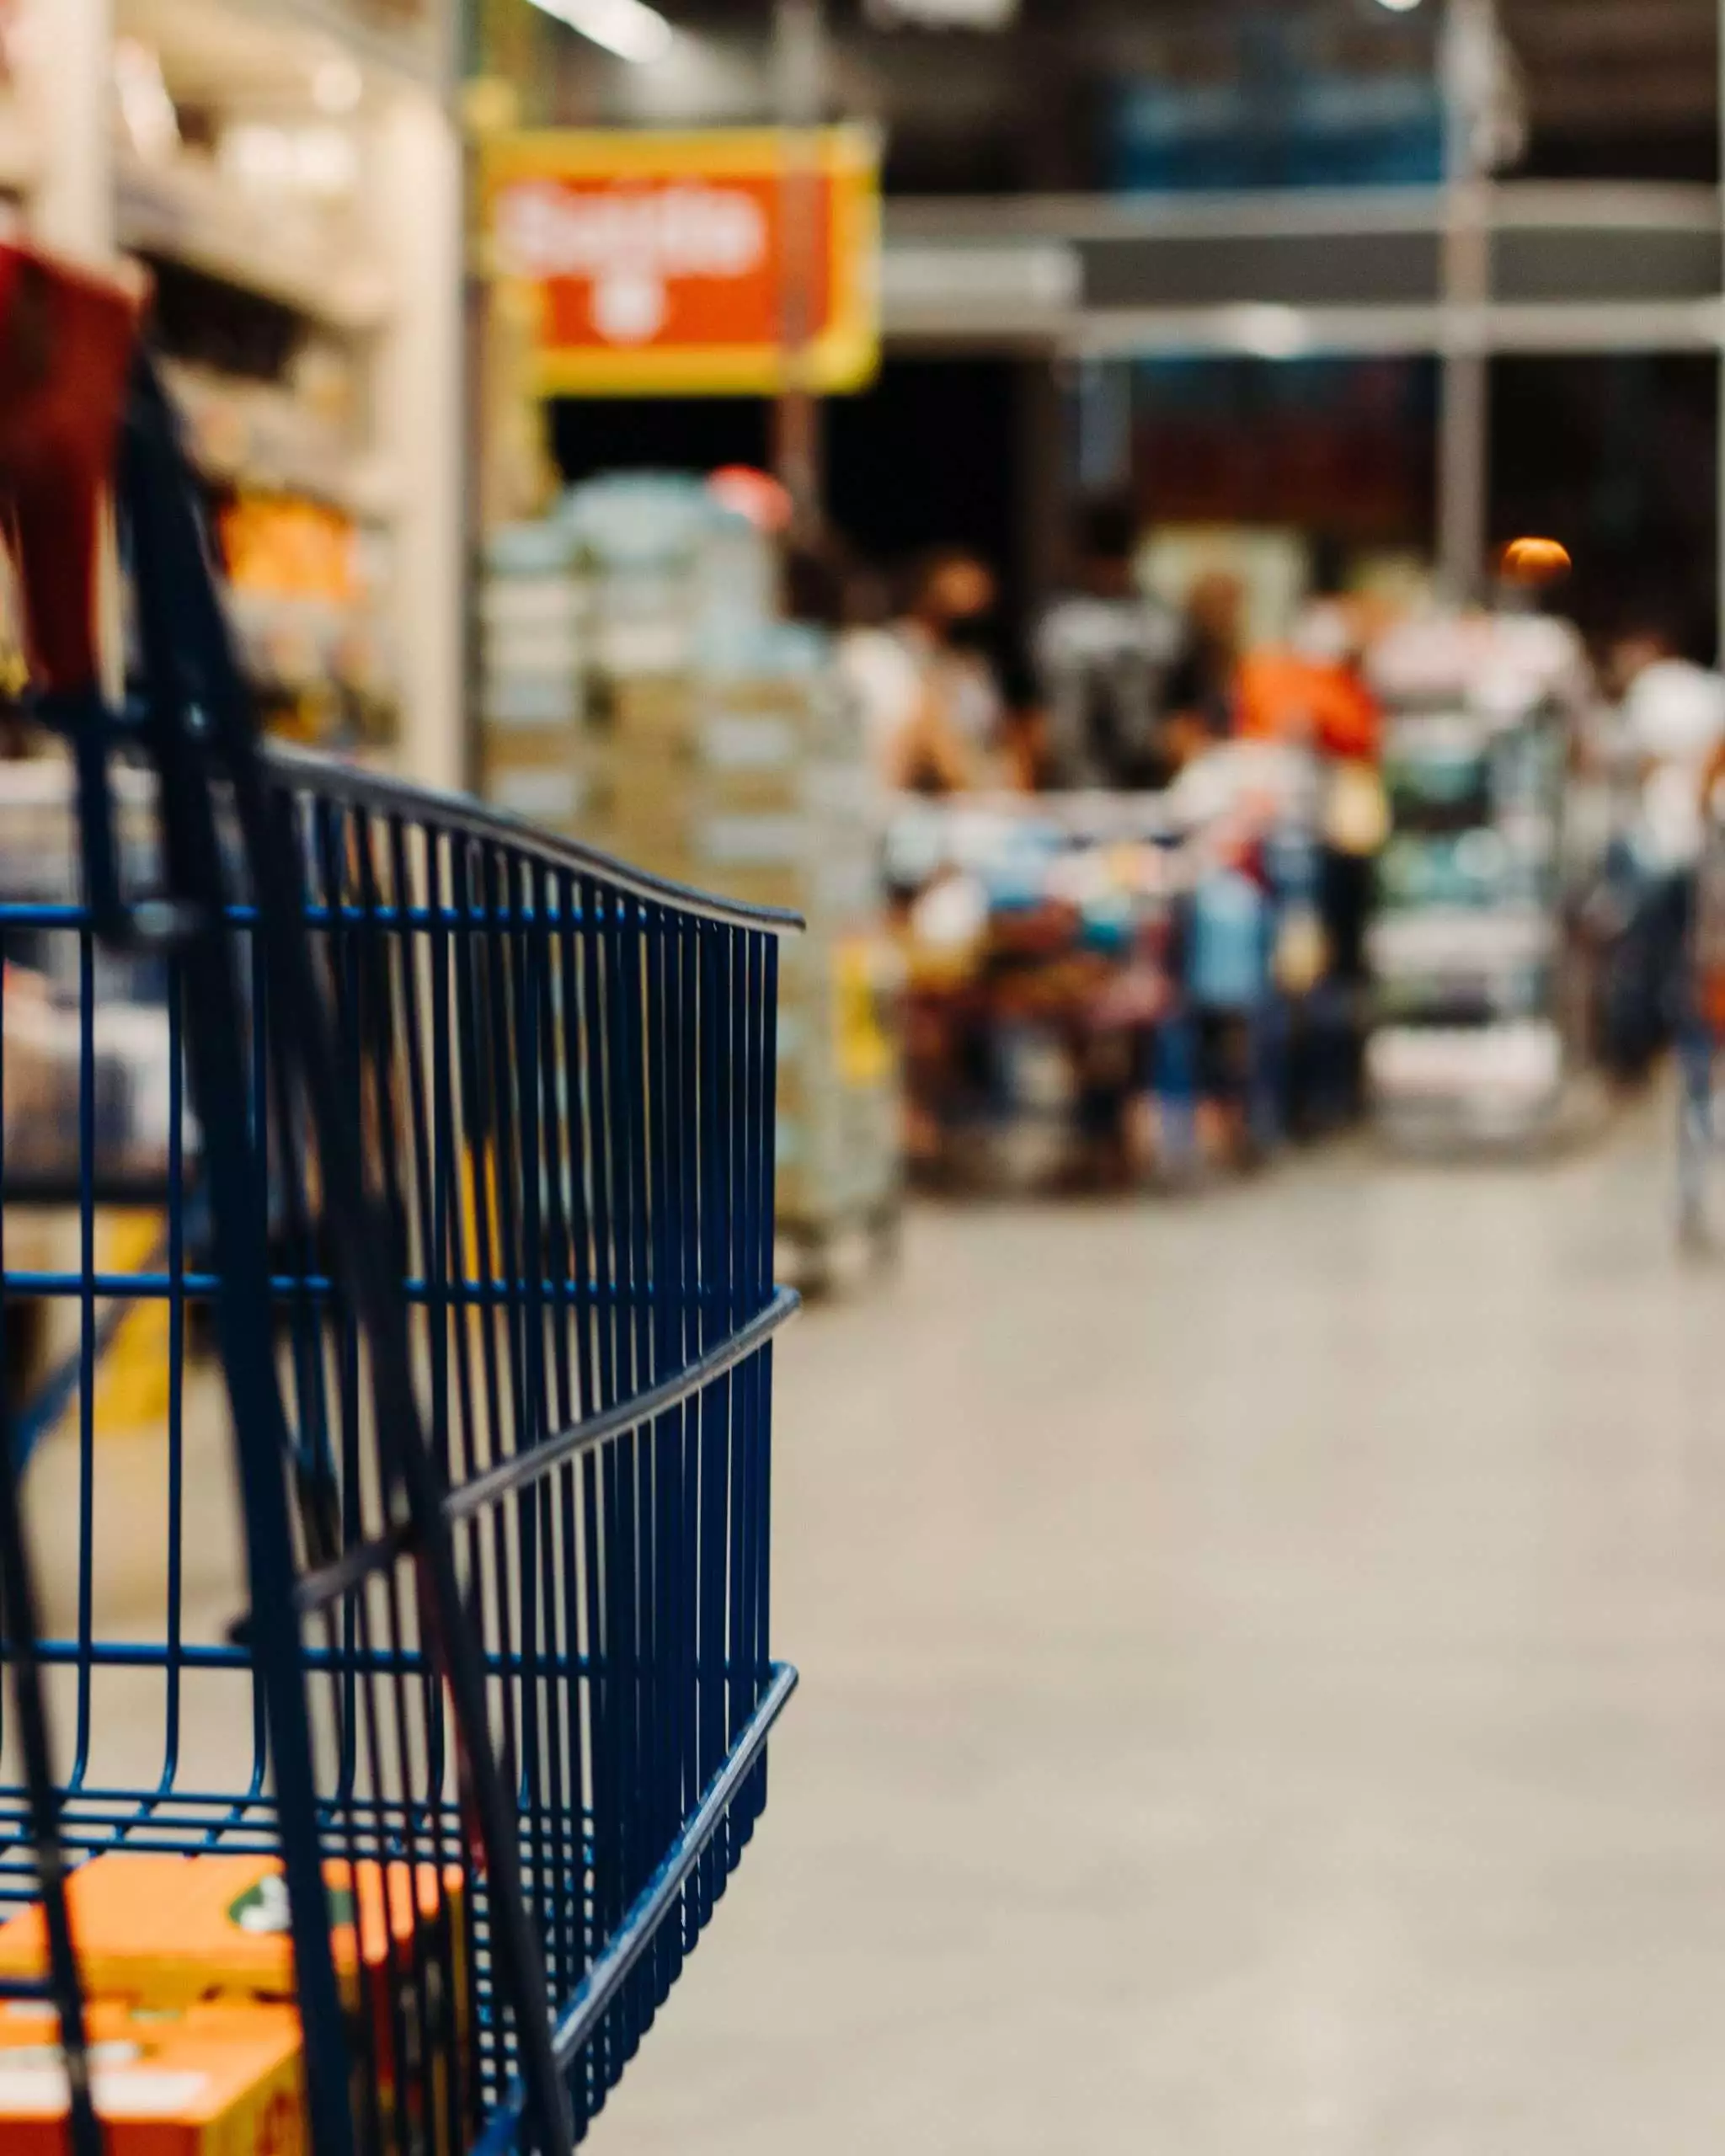 What Can You Buy With Food Stamps: 7 Items to Look Out For 5